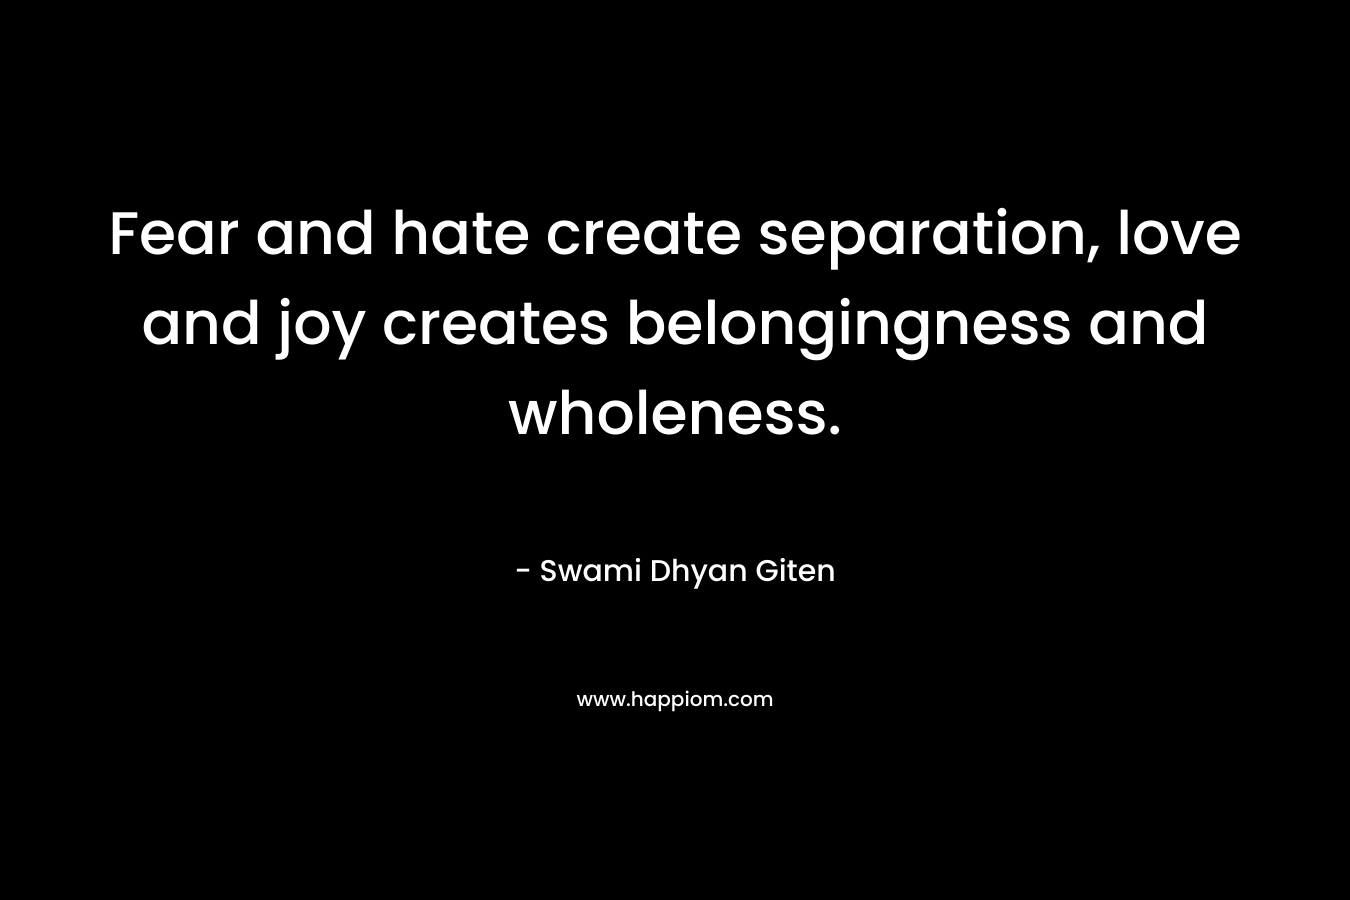 Fear and hate create separation, love and joy creates belongingness and wholeness.